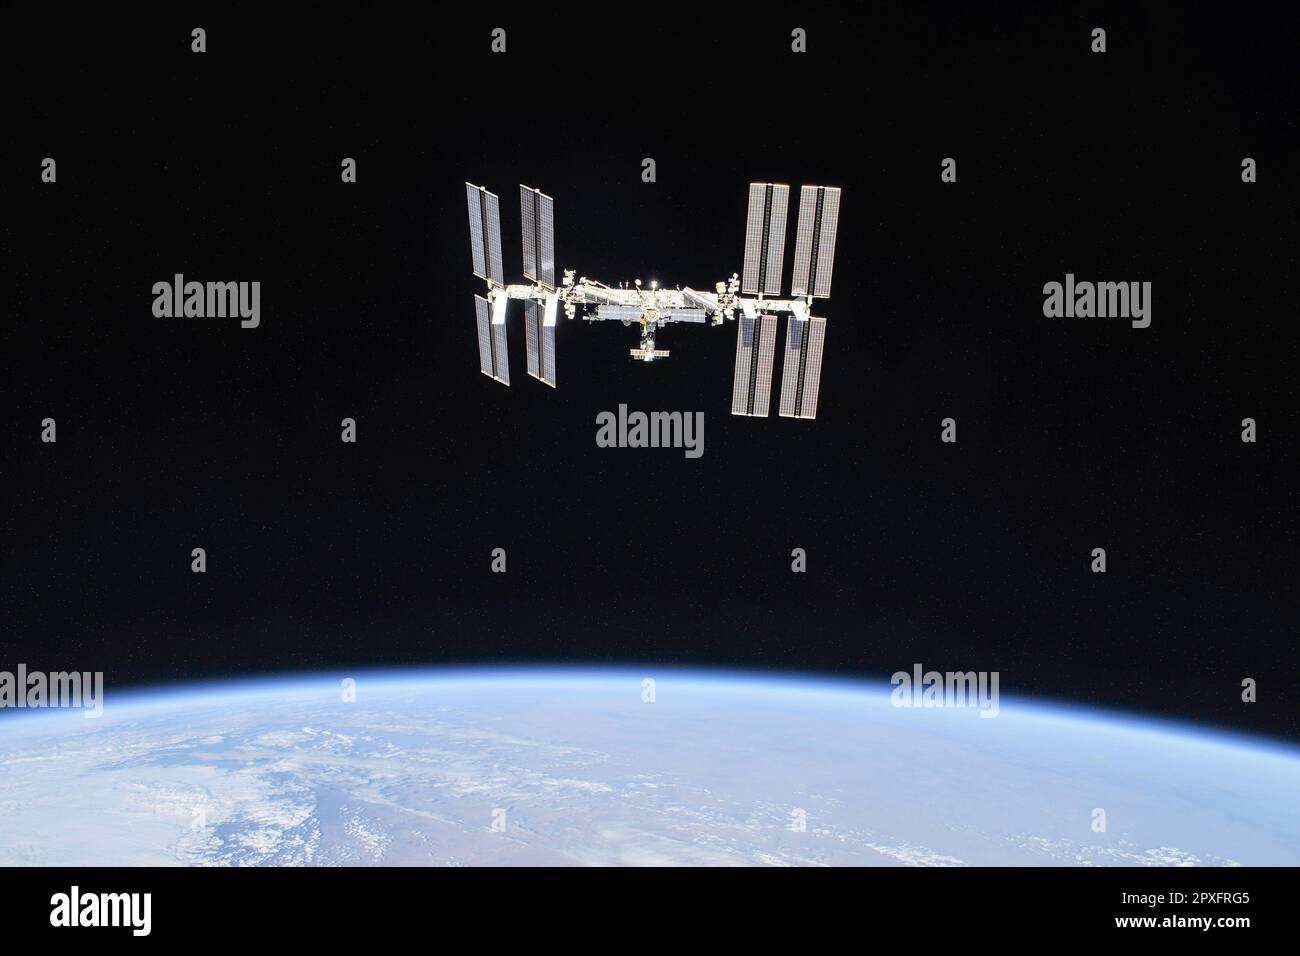 The International Space Station (ISS) photographed by Expedition 56 crew members from a Soyuz spacecraft after undocking on October 4, 2018. NASA astronauts Andrew Feustel and Ricky Arnold and Roscosmos cosmonaut Oleg Artemyev executed a fly around of the orbiting laboratory to take pictures of the station before returning home after spending 197 days in space. The station will celebrate the 20th anniversary of the launch of the first element Zarya in November 2018. Credit: NASA/Roscosmos via CNP Stock Photo